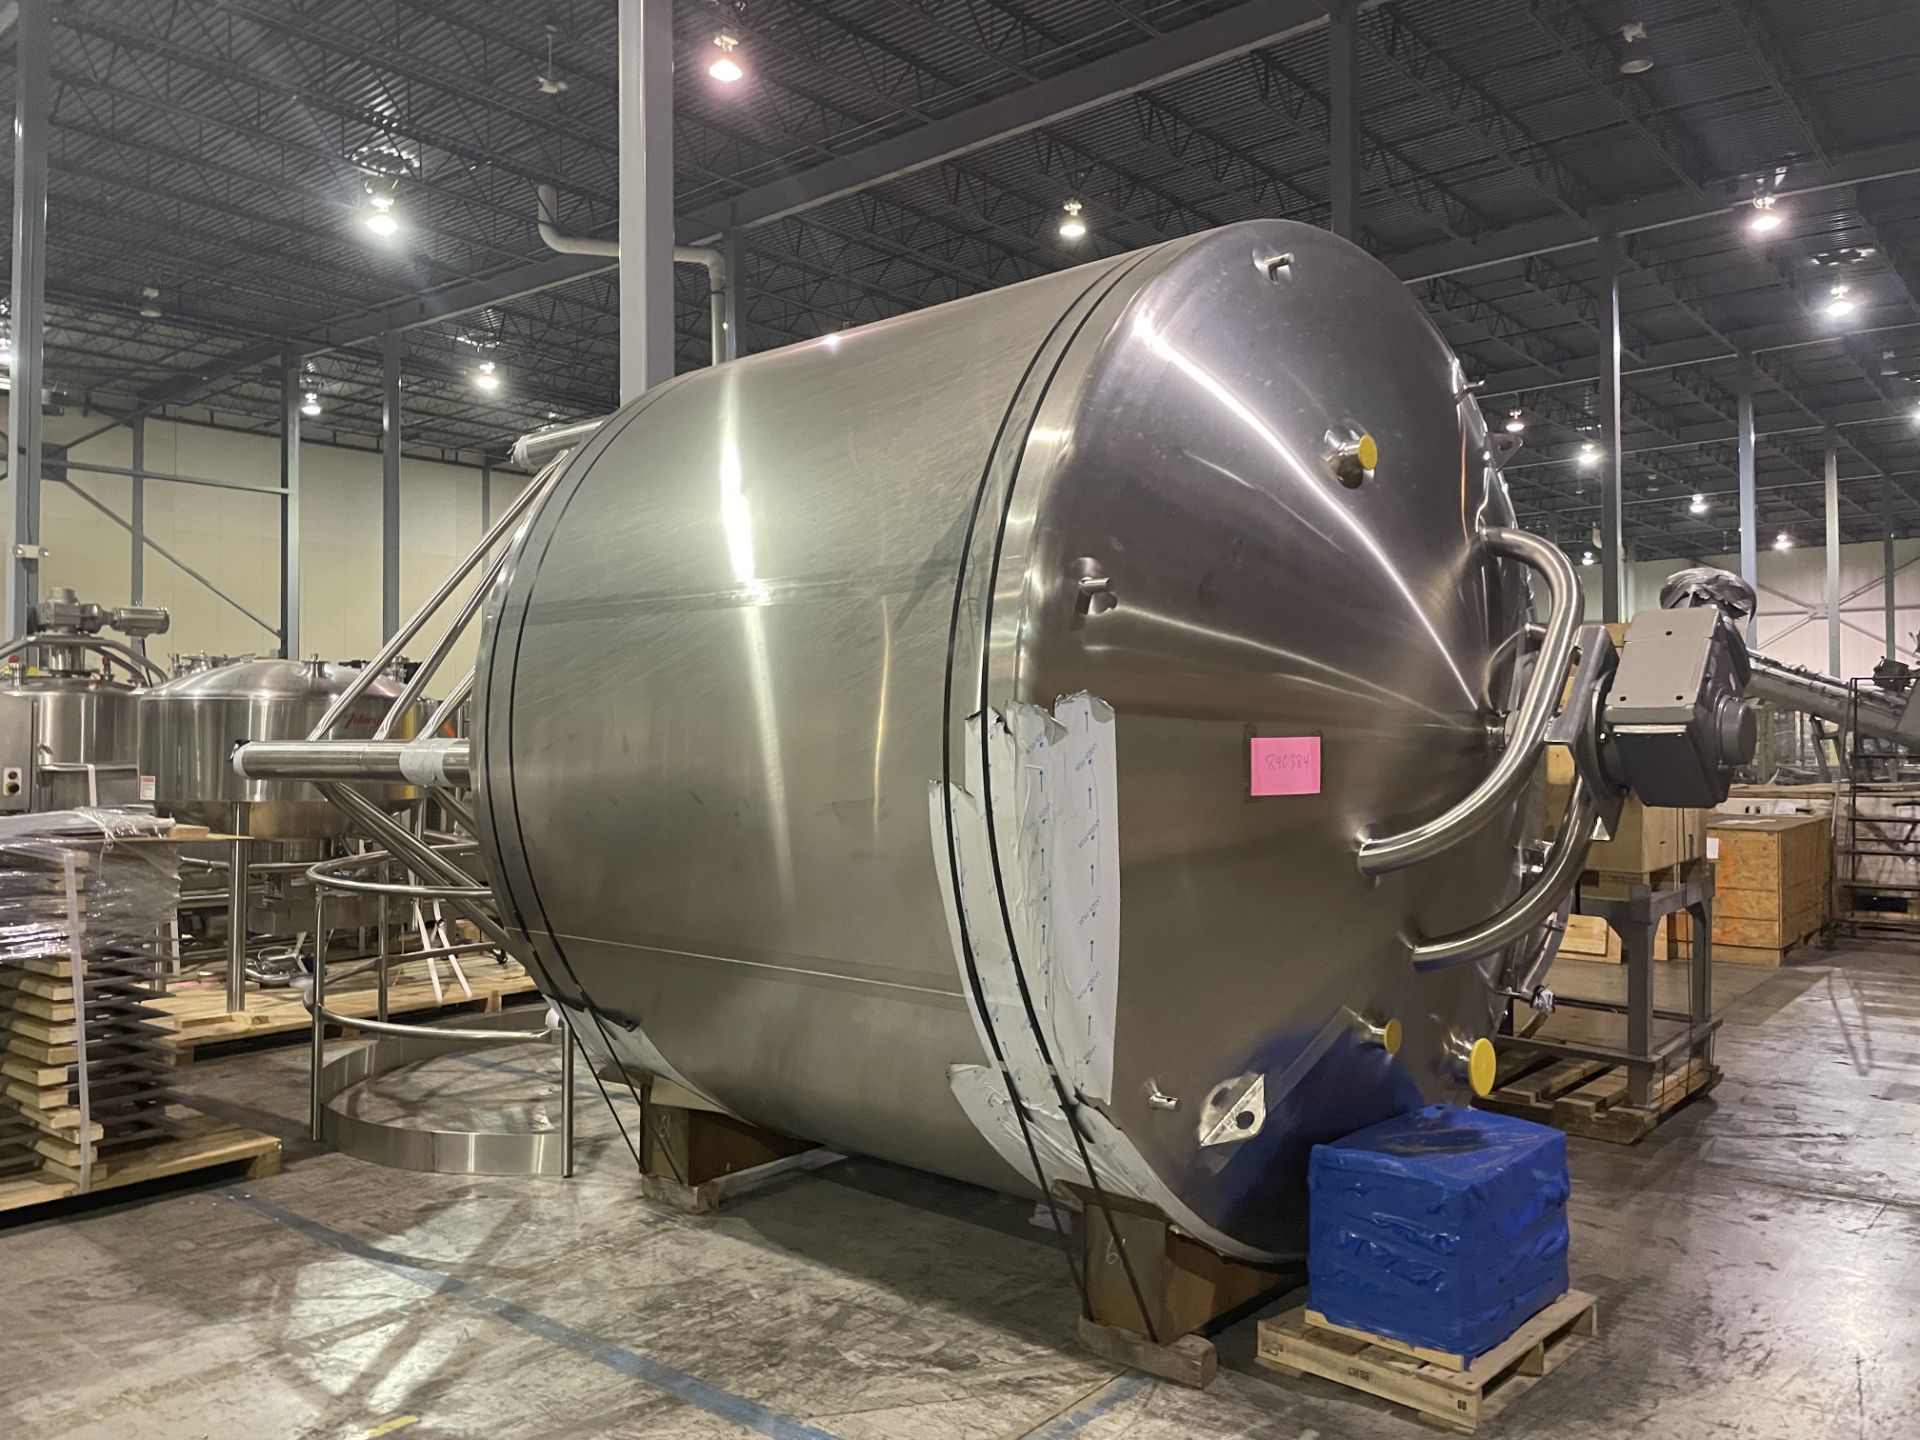 NEW FELDMEIER 4500 GALLON TANK Agitated and Jacketed Model: EPC-4500-114-TURB RIGGING/LOADING FEE -